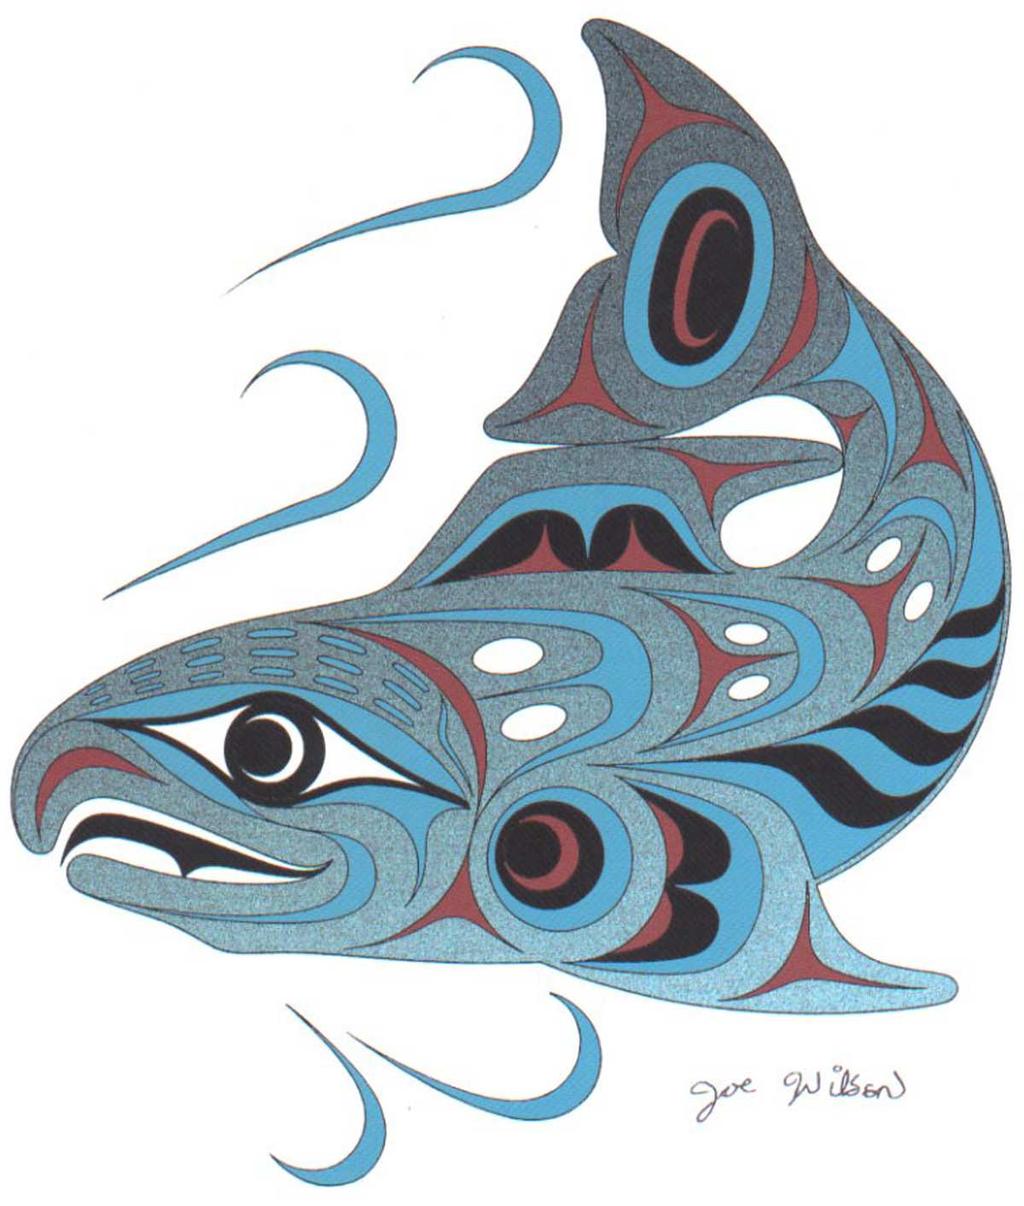 The name 'sockeye' comes from the Coast Salish people's word ȾEḴI, said "tsekhi". It means "red fish". "Sockeye" is the way English-speaking people say it.